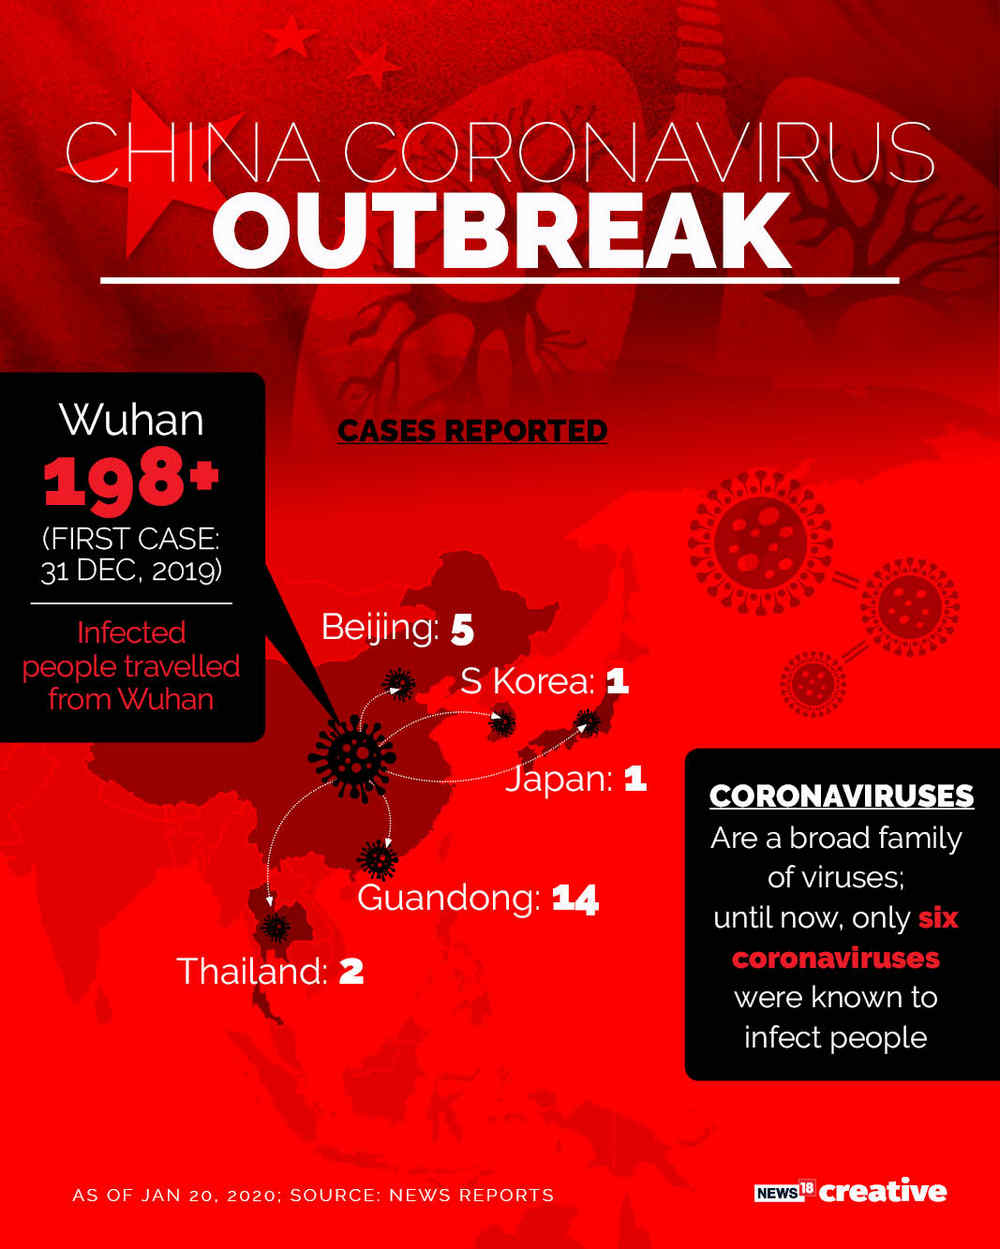 The coronavirus has traveled to other parts of the world and strict precautionary measures are beings taken to control the outbreak. 